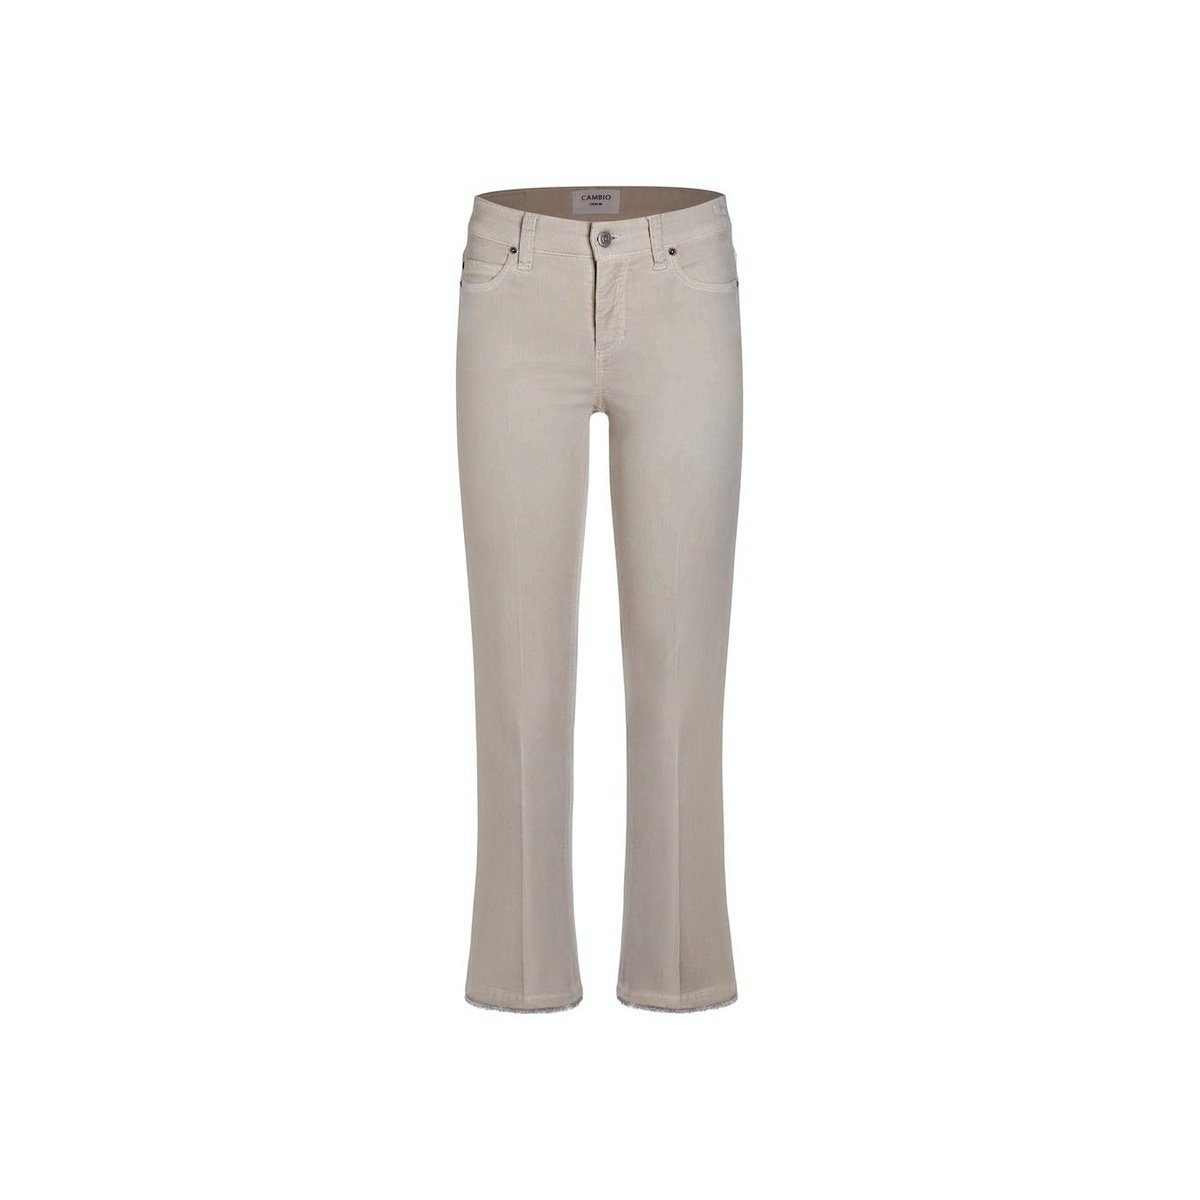 067 (1-tlg) simply 5-Pocket-Jeans Cambio uni taupe